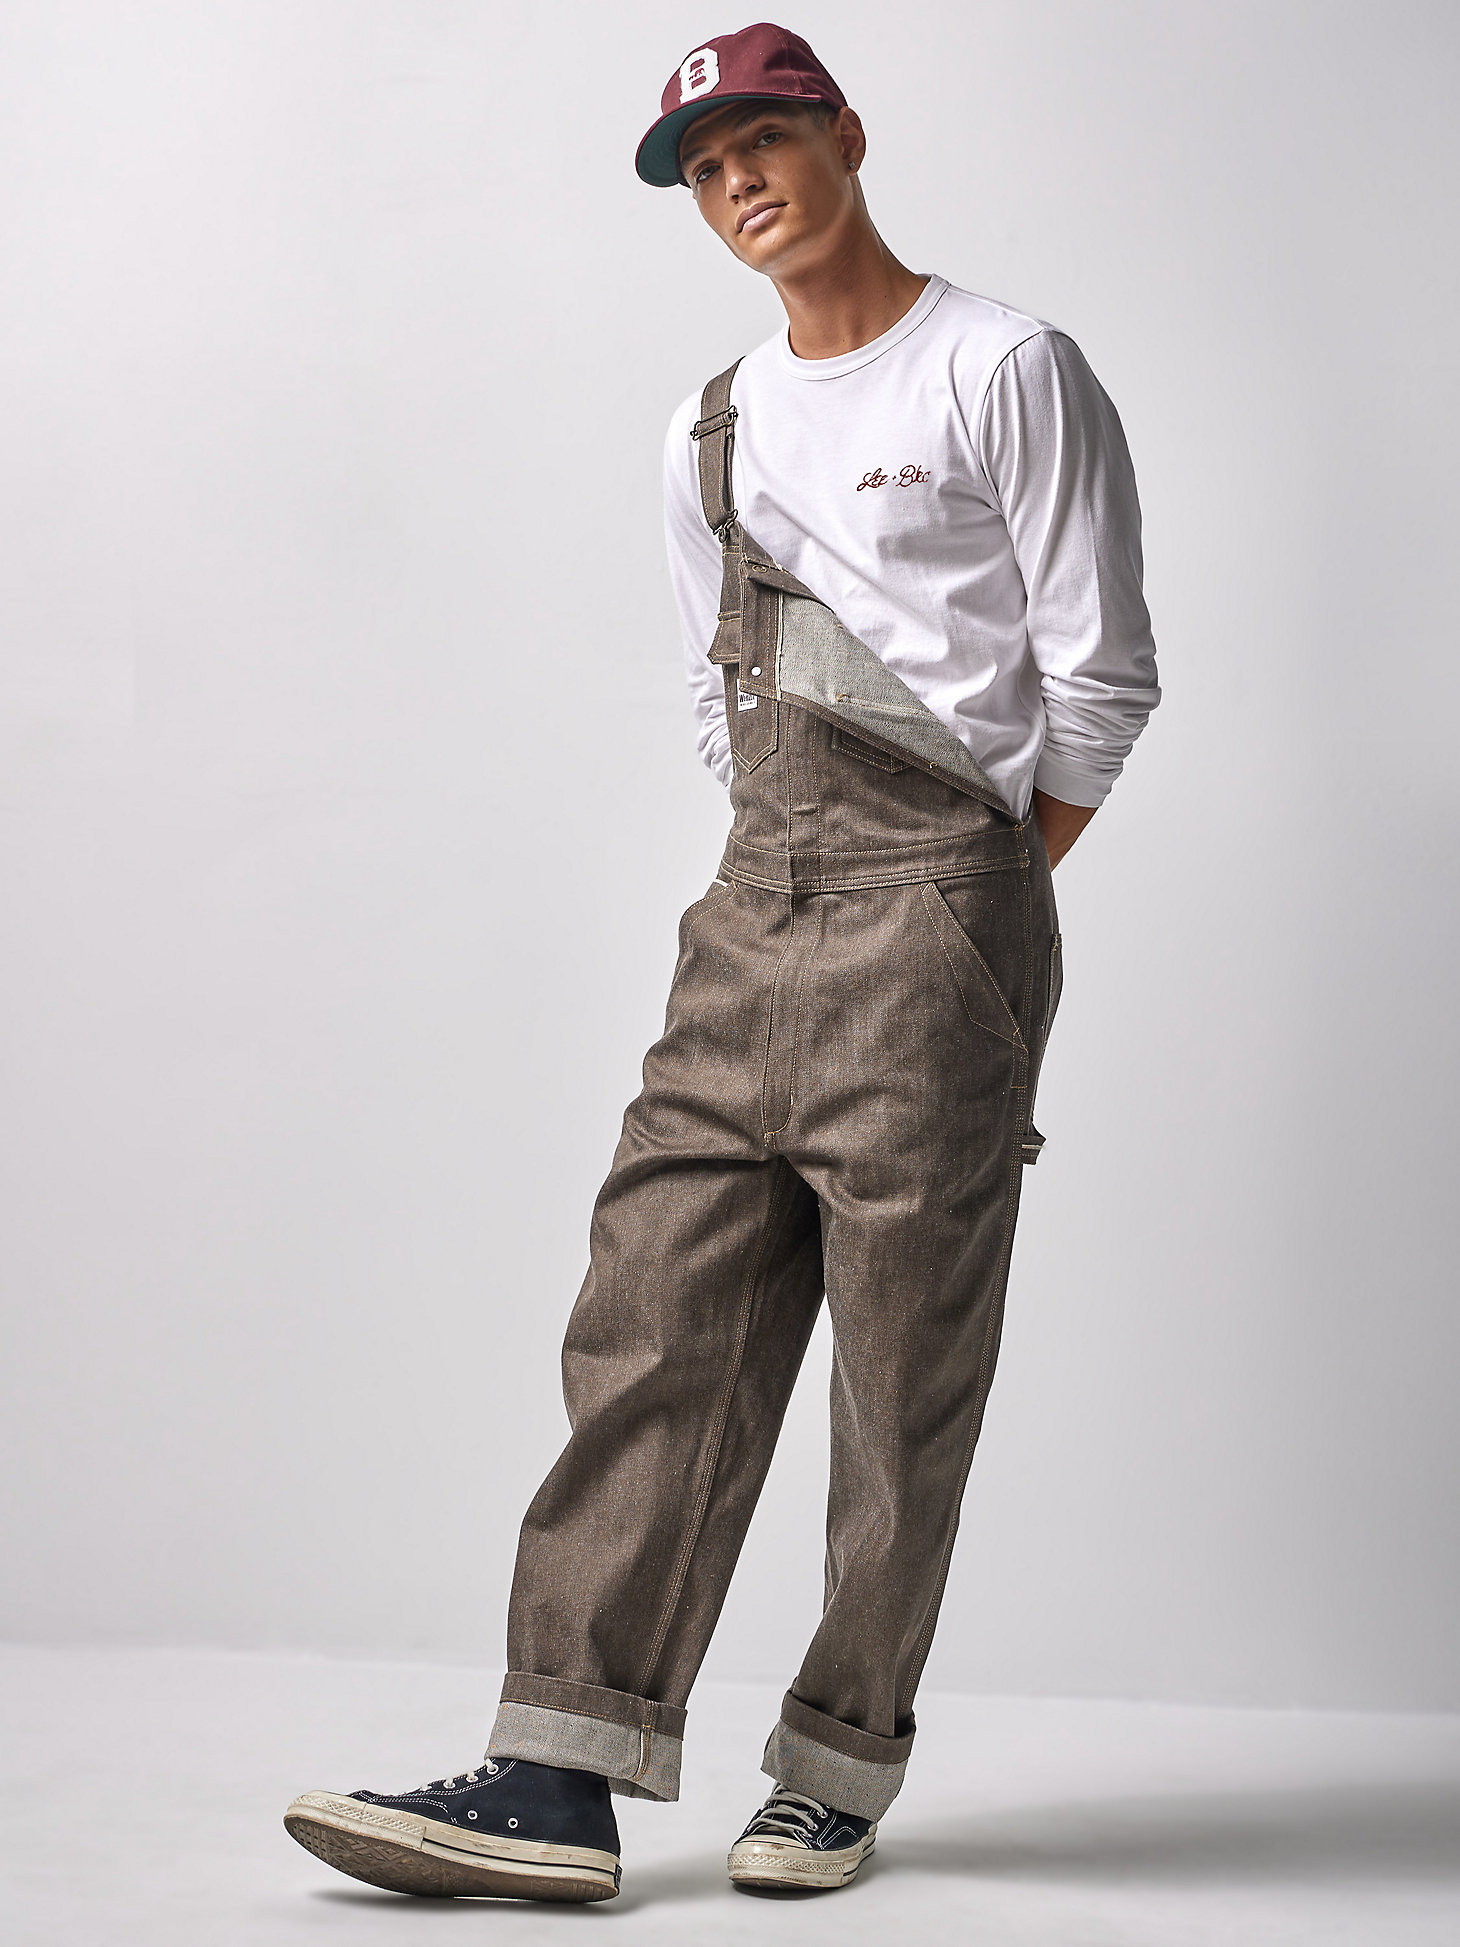 Men's Lee® x The Brooklyn Circus® Whizit Zip Overall in Brown Selvedge alternative view 2